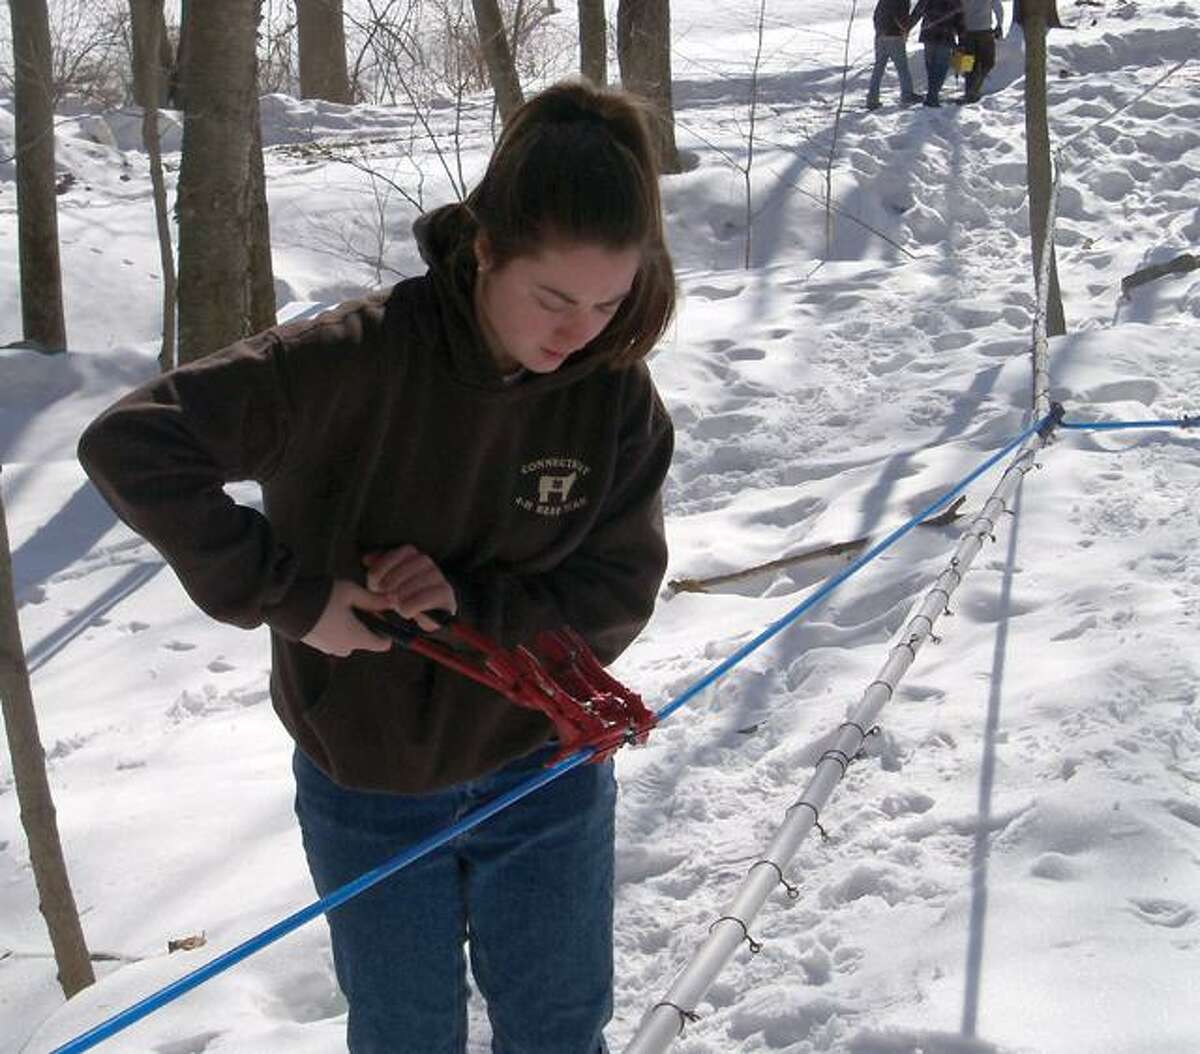 RICKY CAMPBELL/ Register CitizenSuzie Theriault, a junior at Wamogo Regional High School, works on the line after the trees are tapped for syrup right off Route 202. The school sells the syrup once it's all collected.